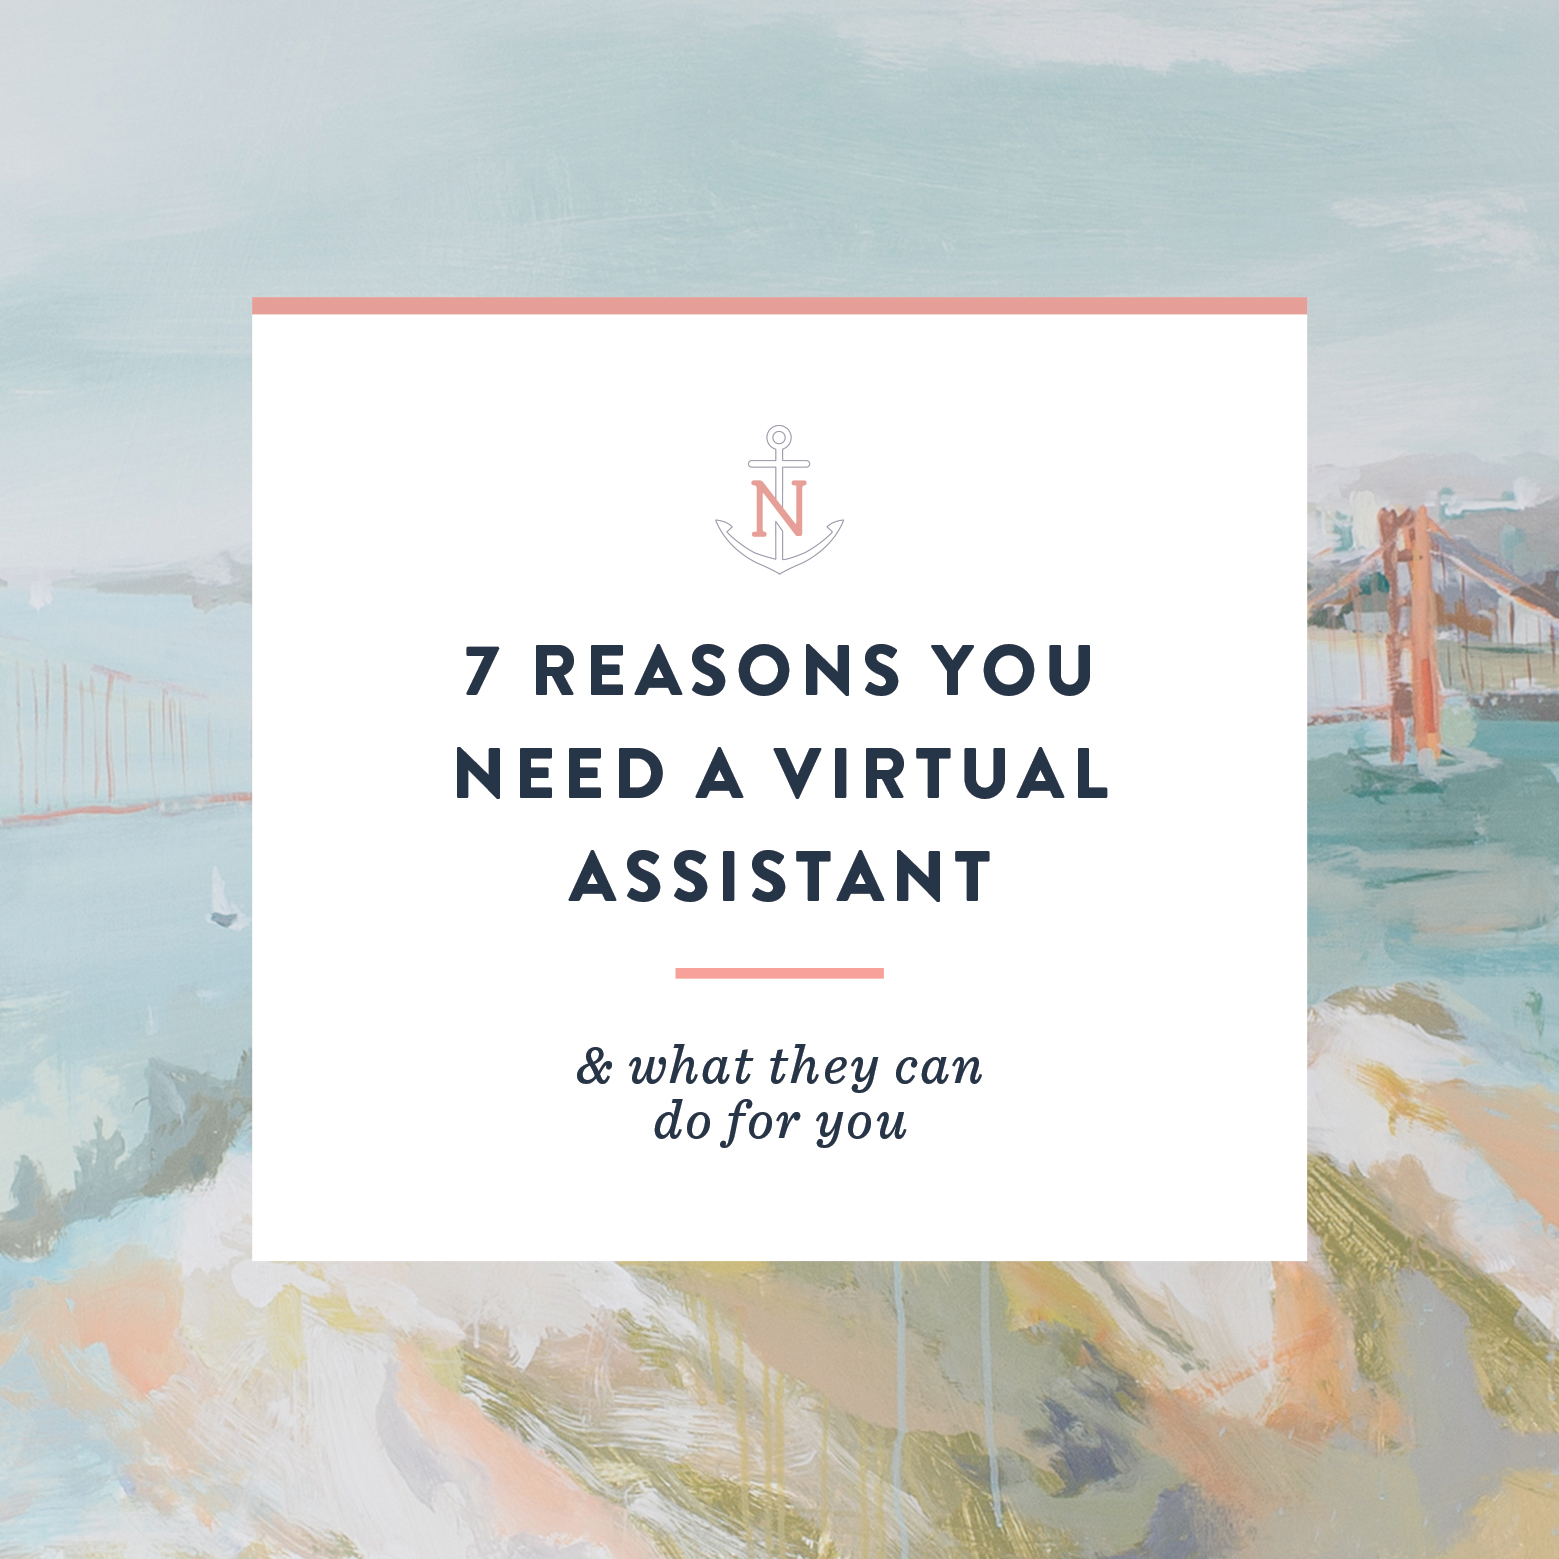 7 Reasons You Need a Virtual Assistant â€” Tips for Creative Entrepreneurs